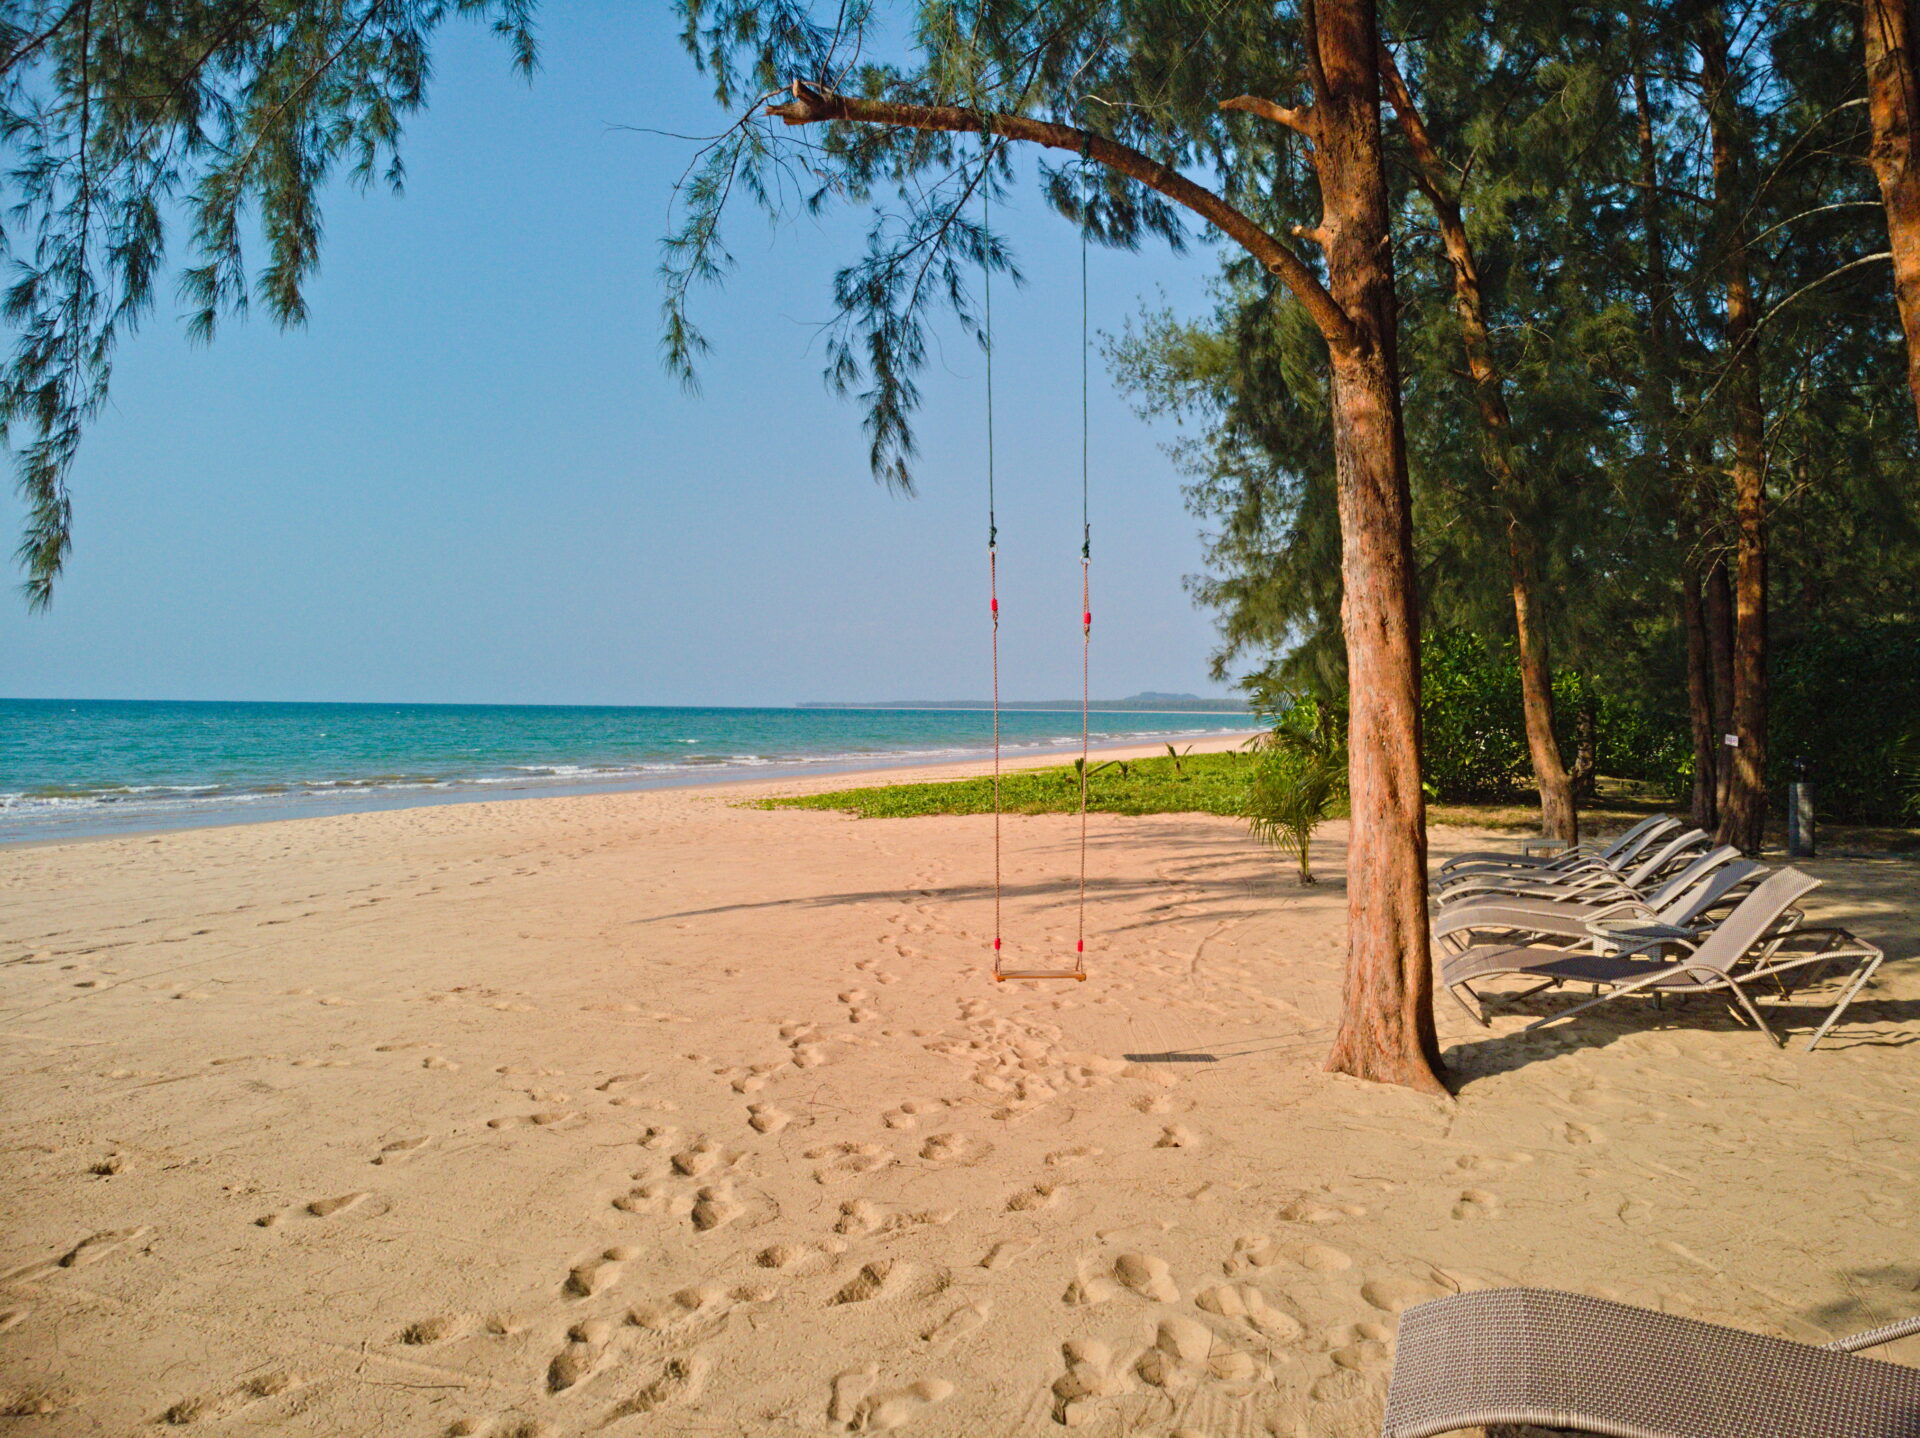 Amazing private beach with fine sand of the Koh Kho Khao Island, Thailand